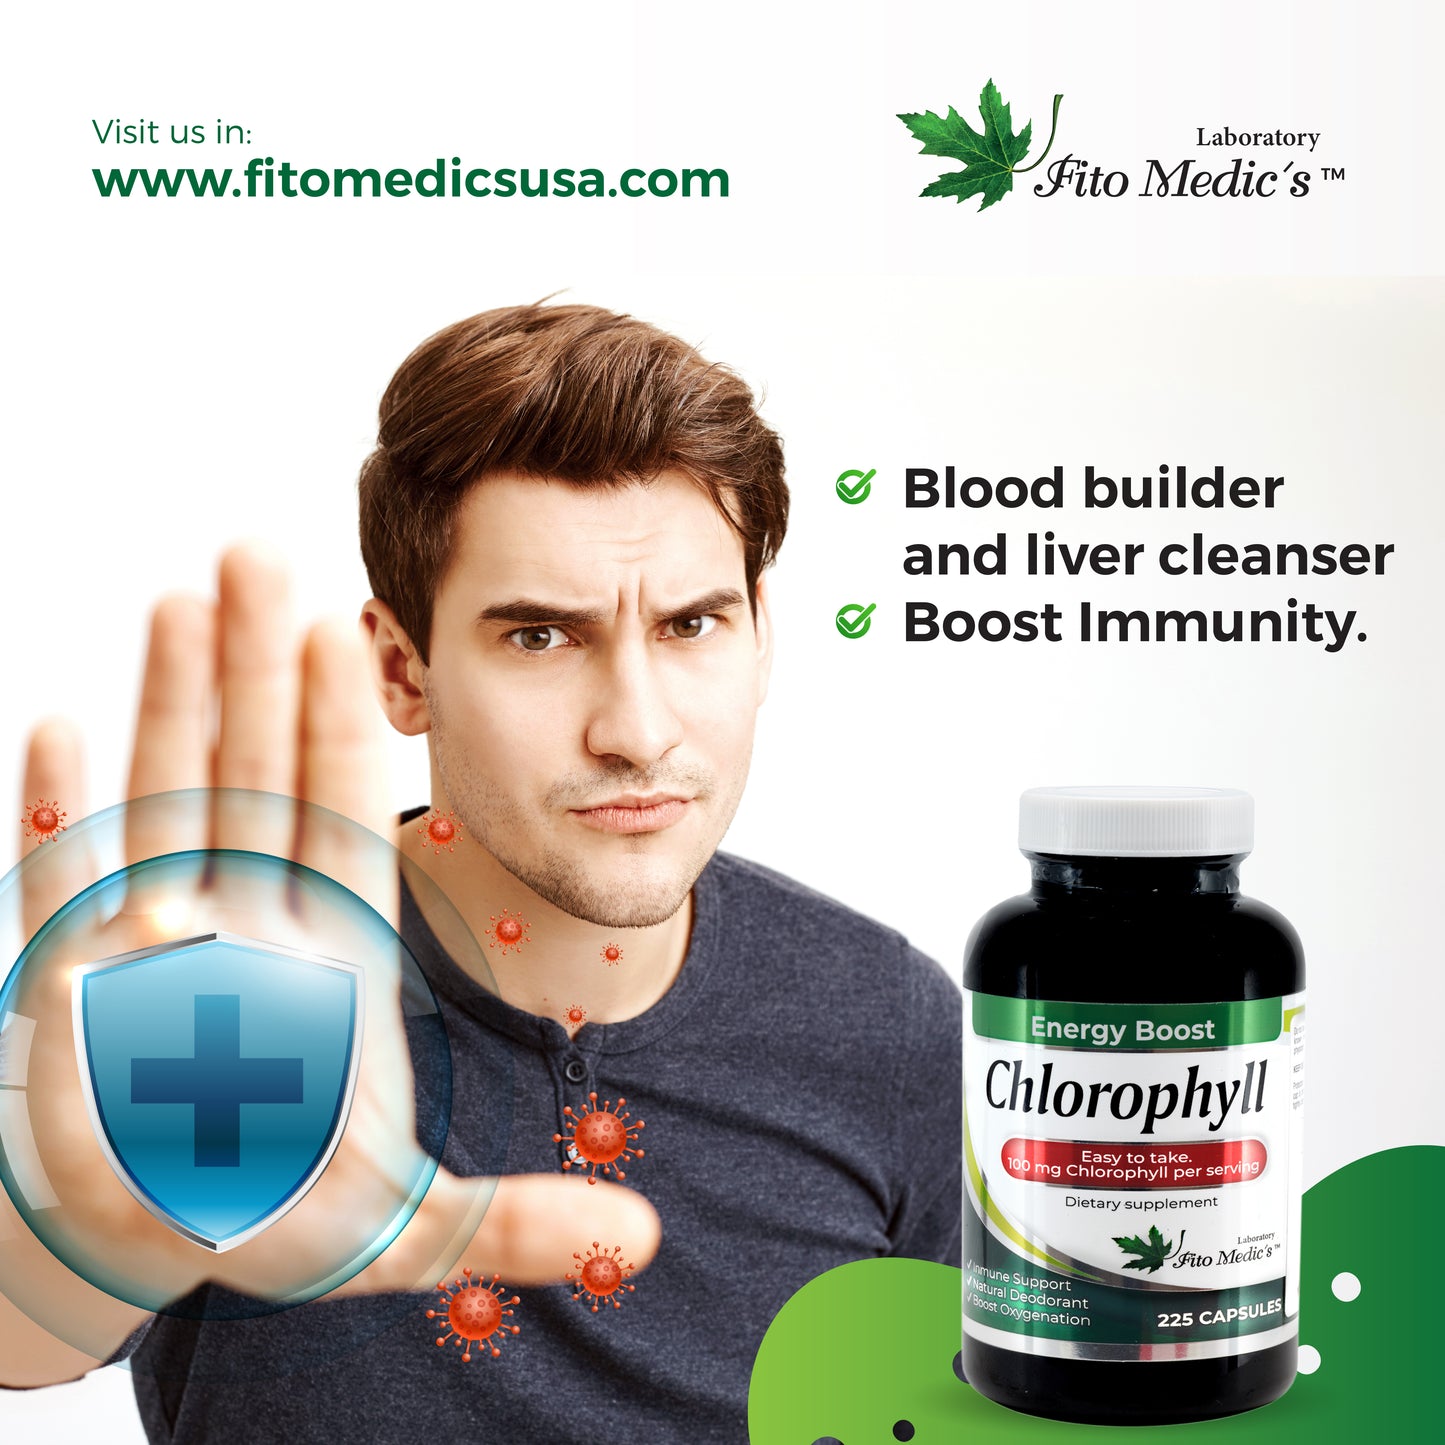 Chlorophyll Fito Medic's Pure Extract High Power Capsules, 100mg Energy Boost, Immune System Support, Internal Deodorant, Altitude Sickness.